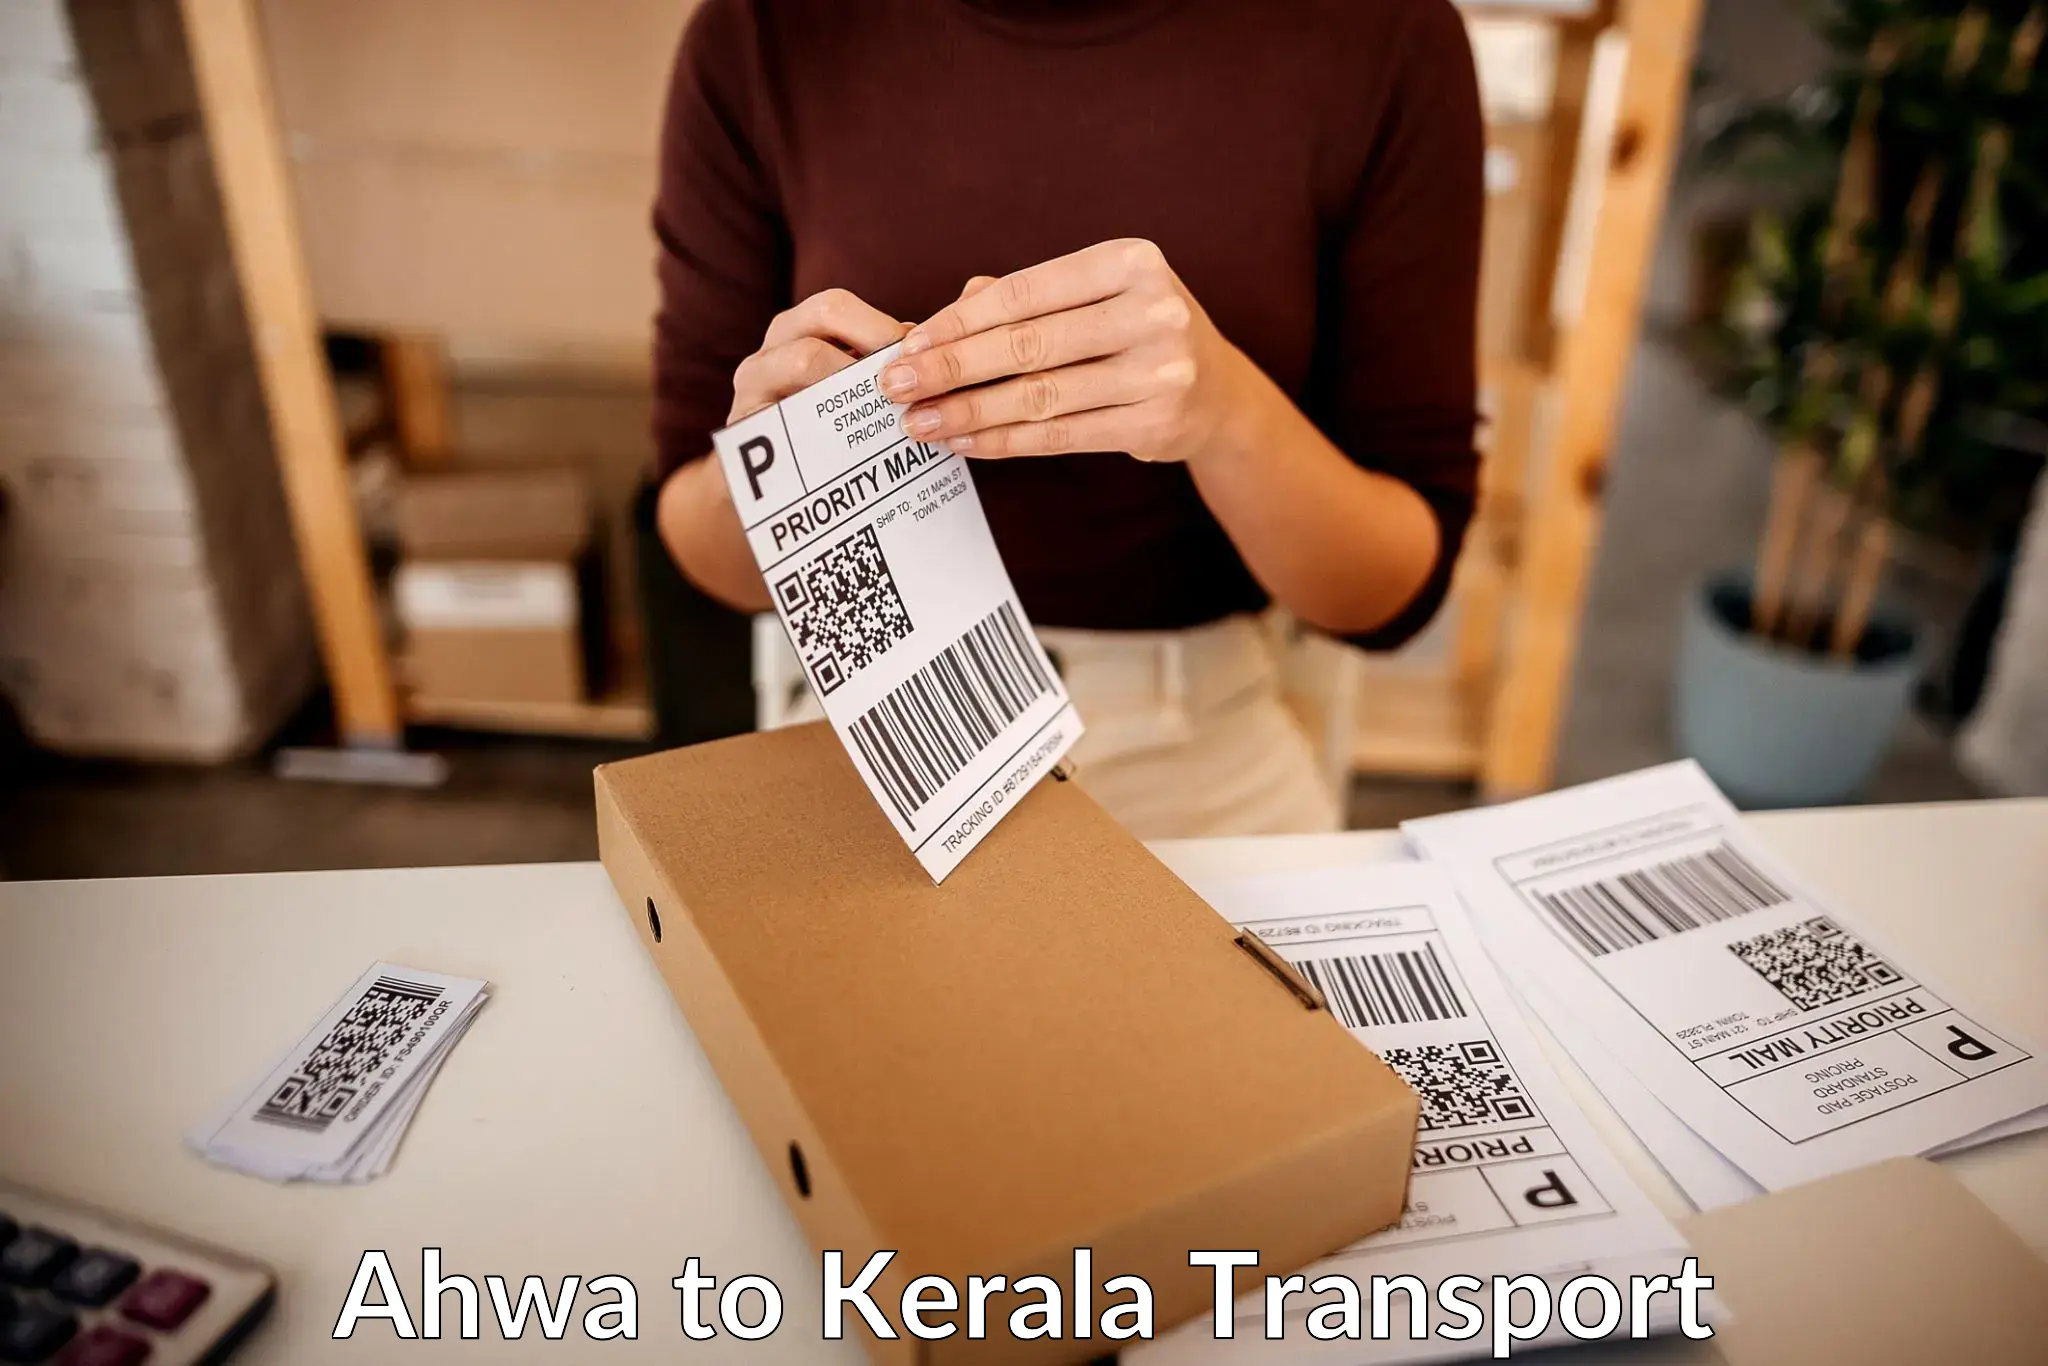 Nationwide transport services Ahwa to Cochin Port Kochi